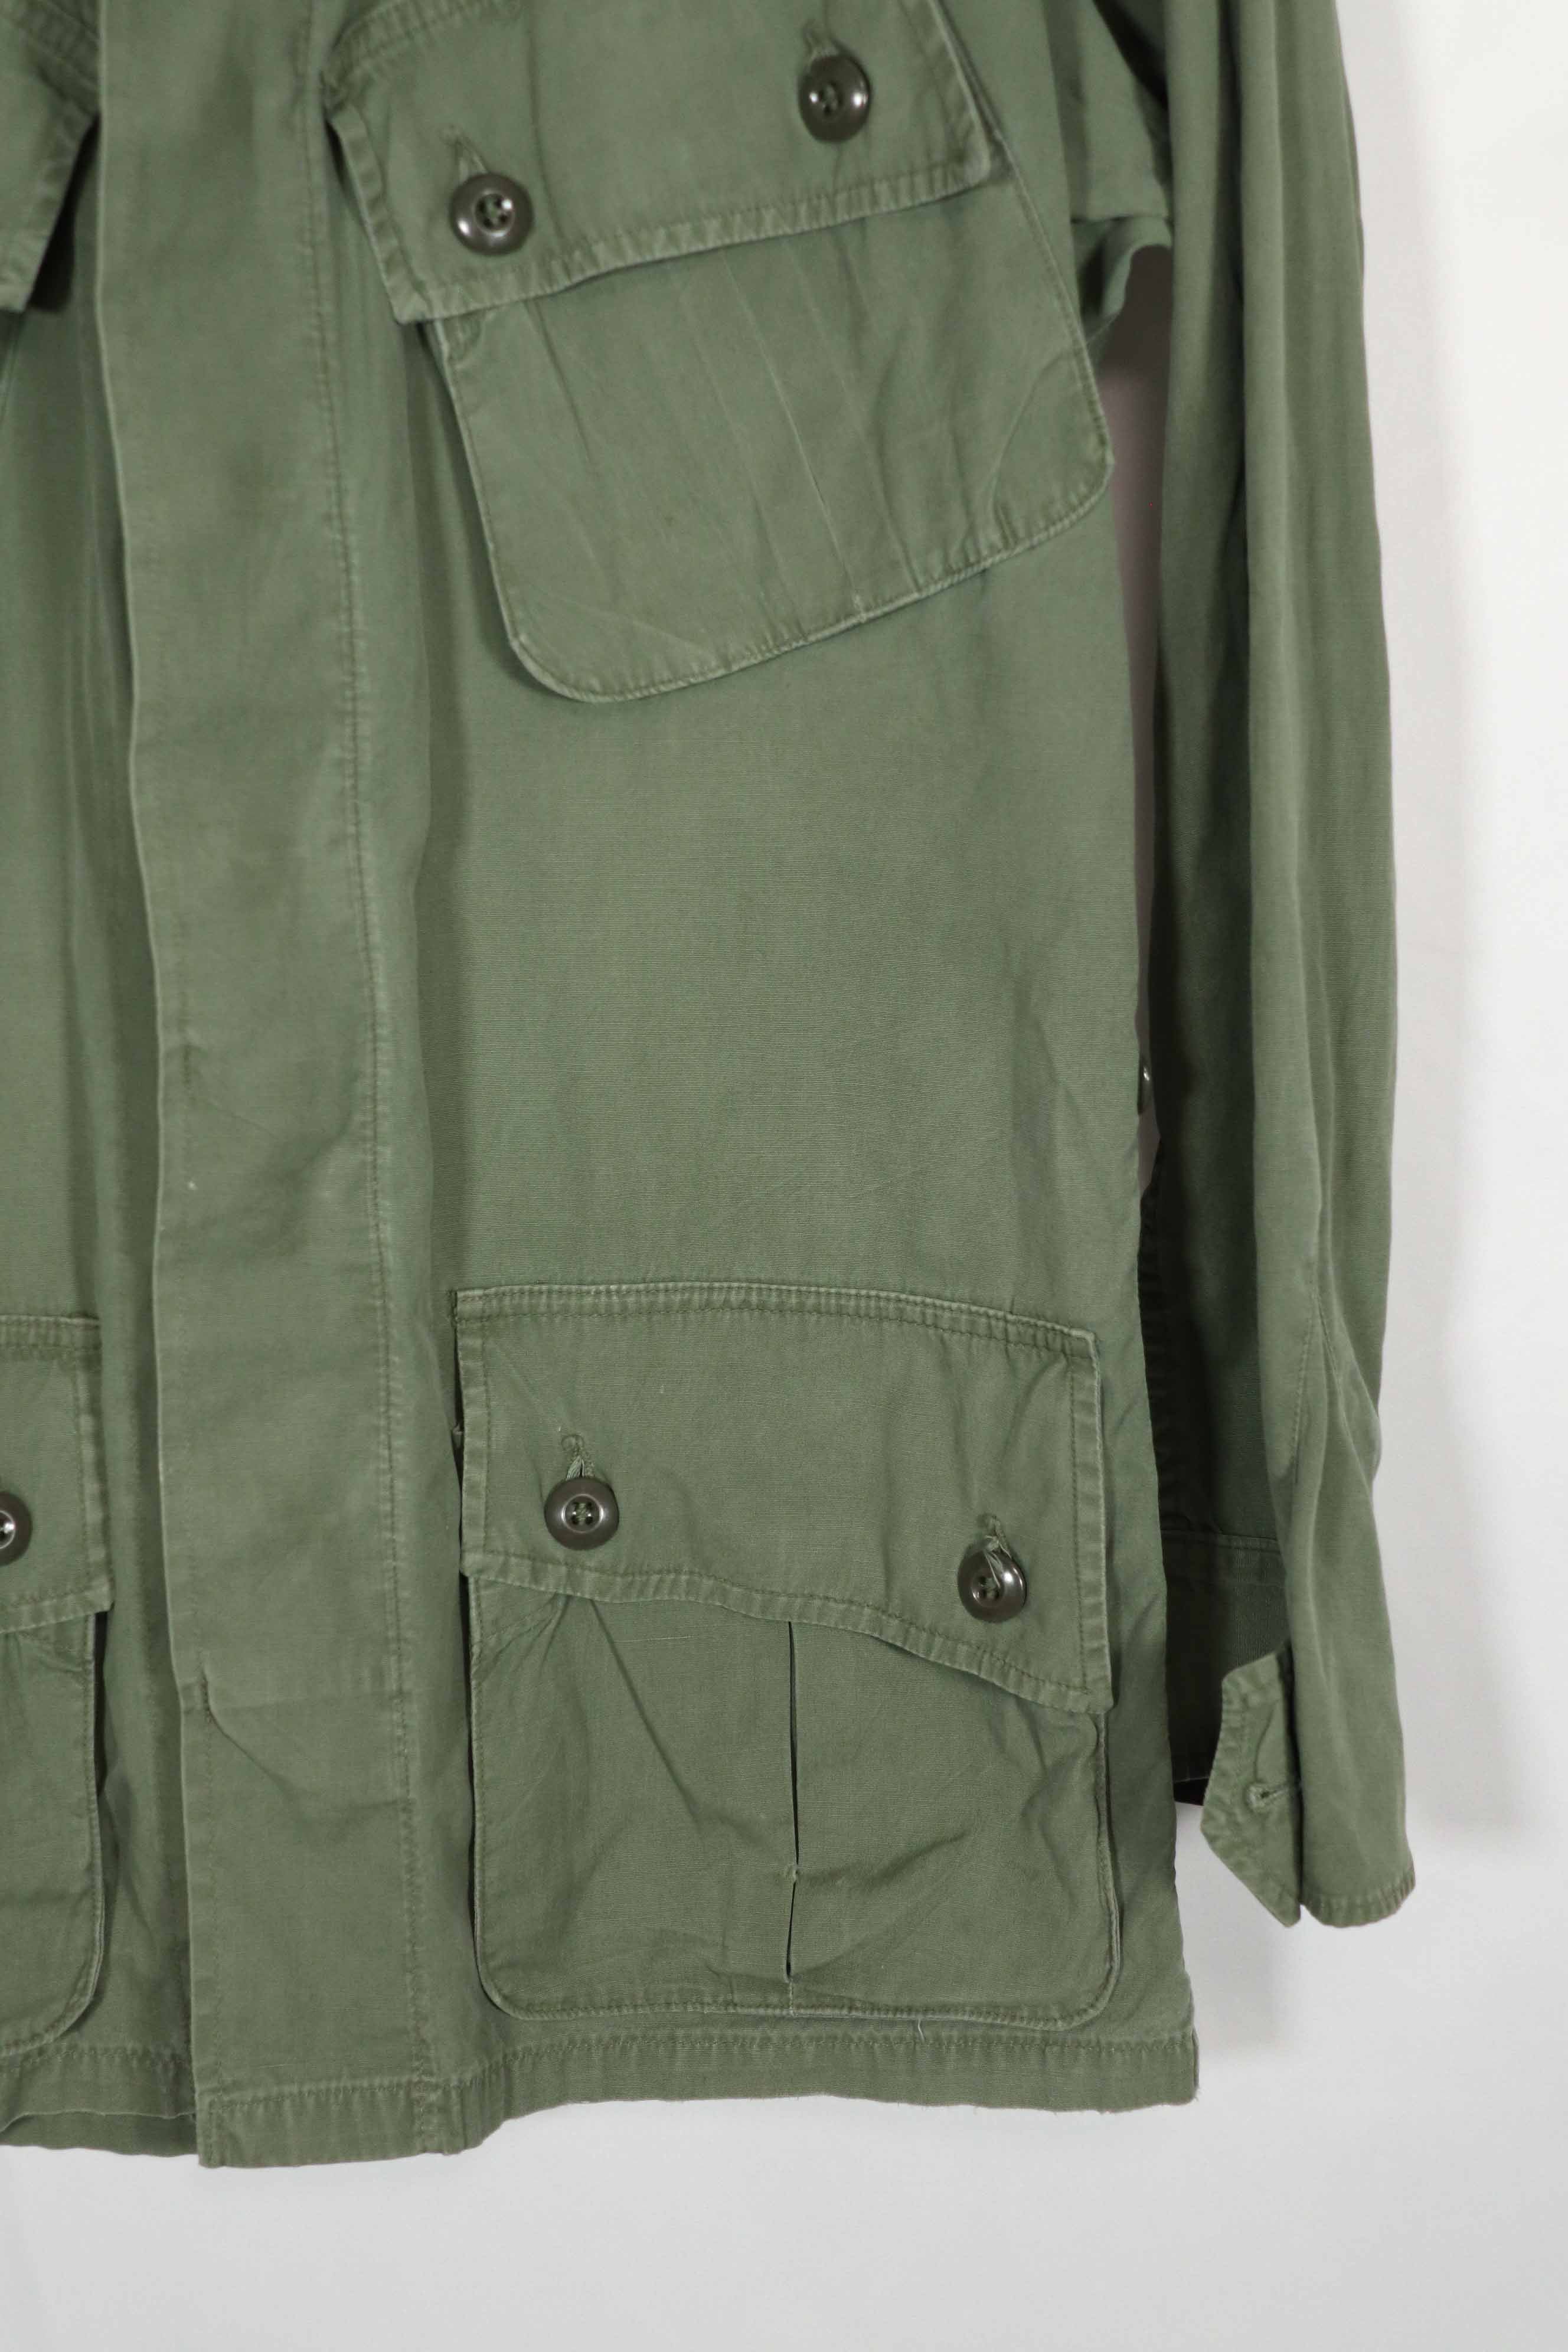 Real 1963 1st Model Jungle Fatigue Jacket R-S Size Used